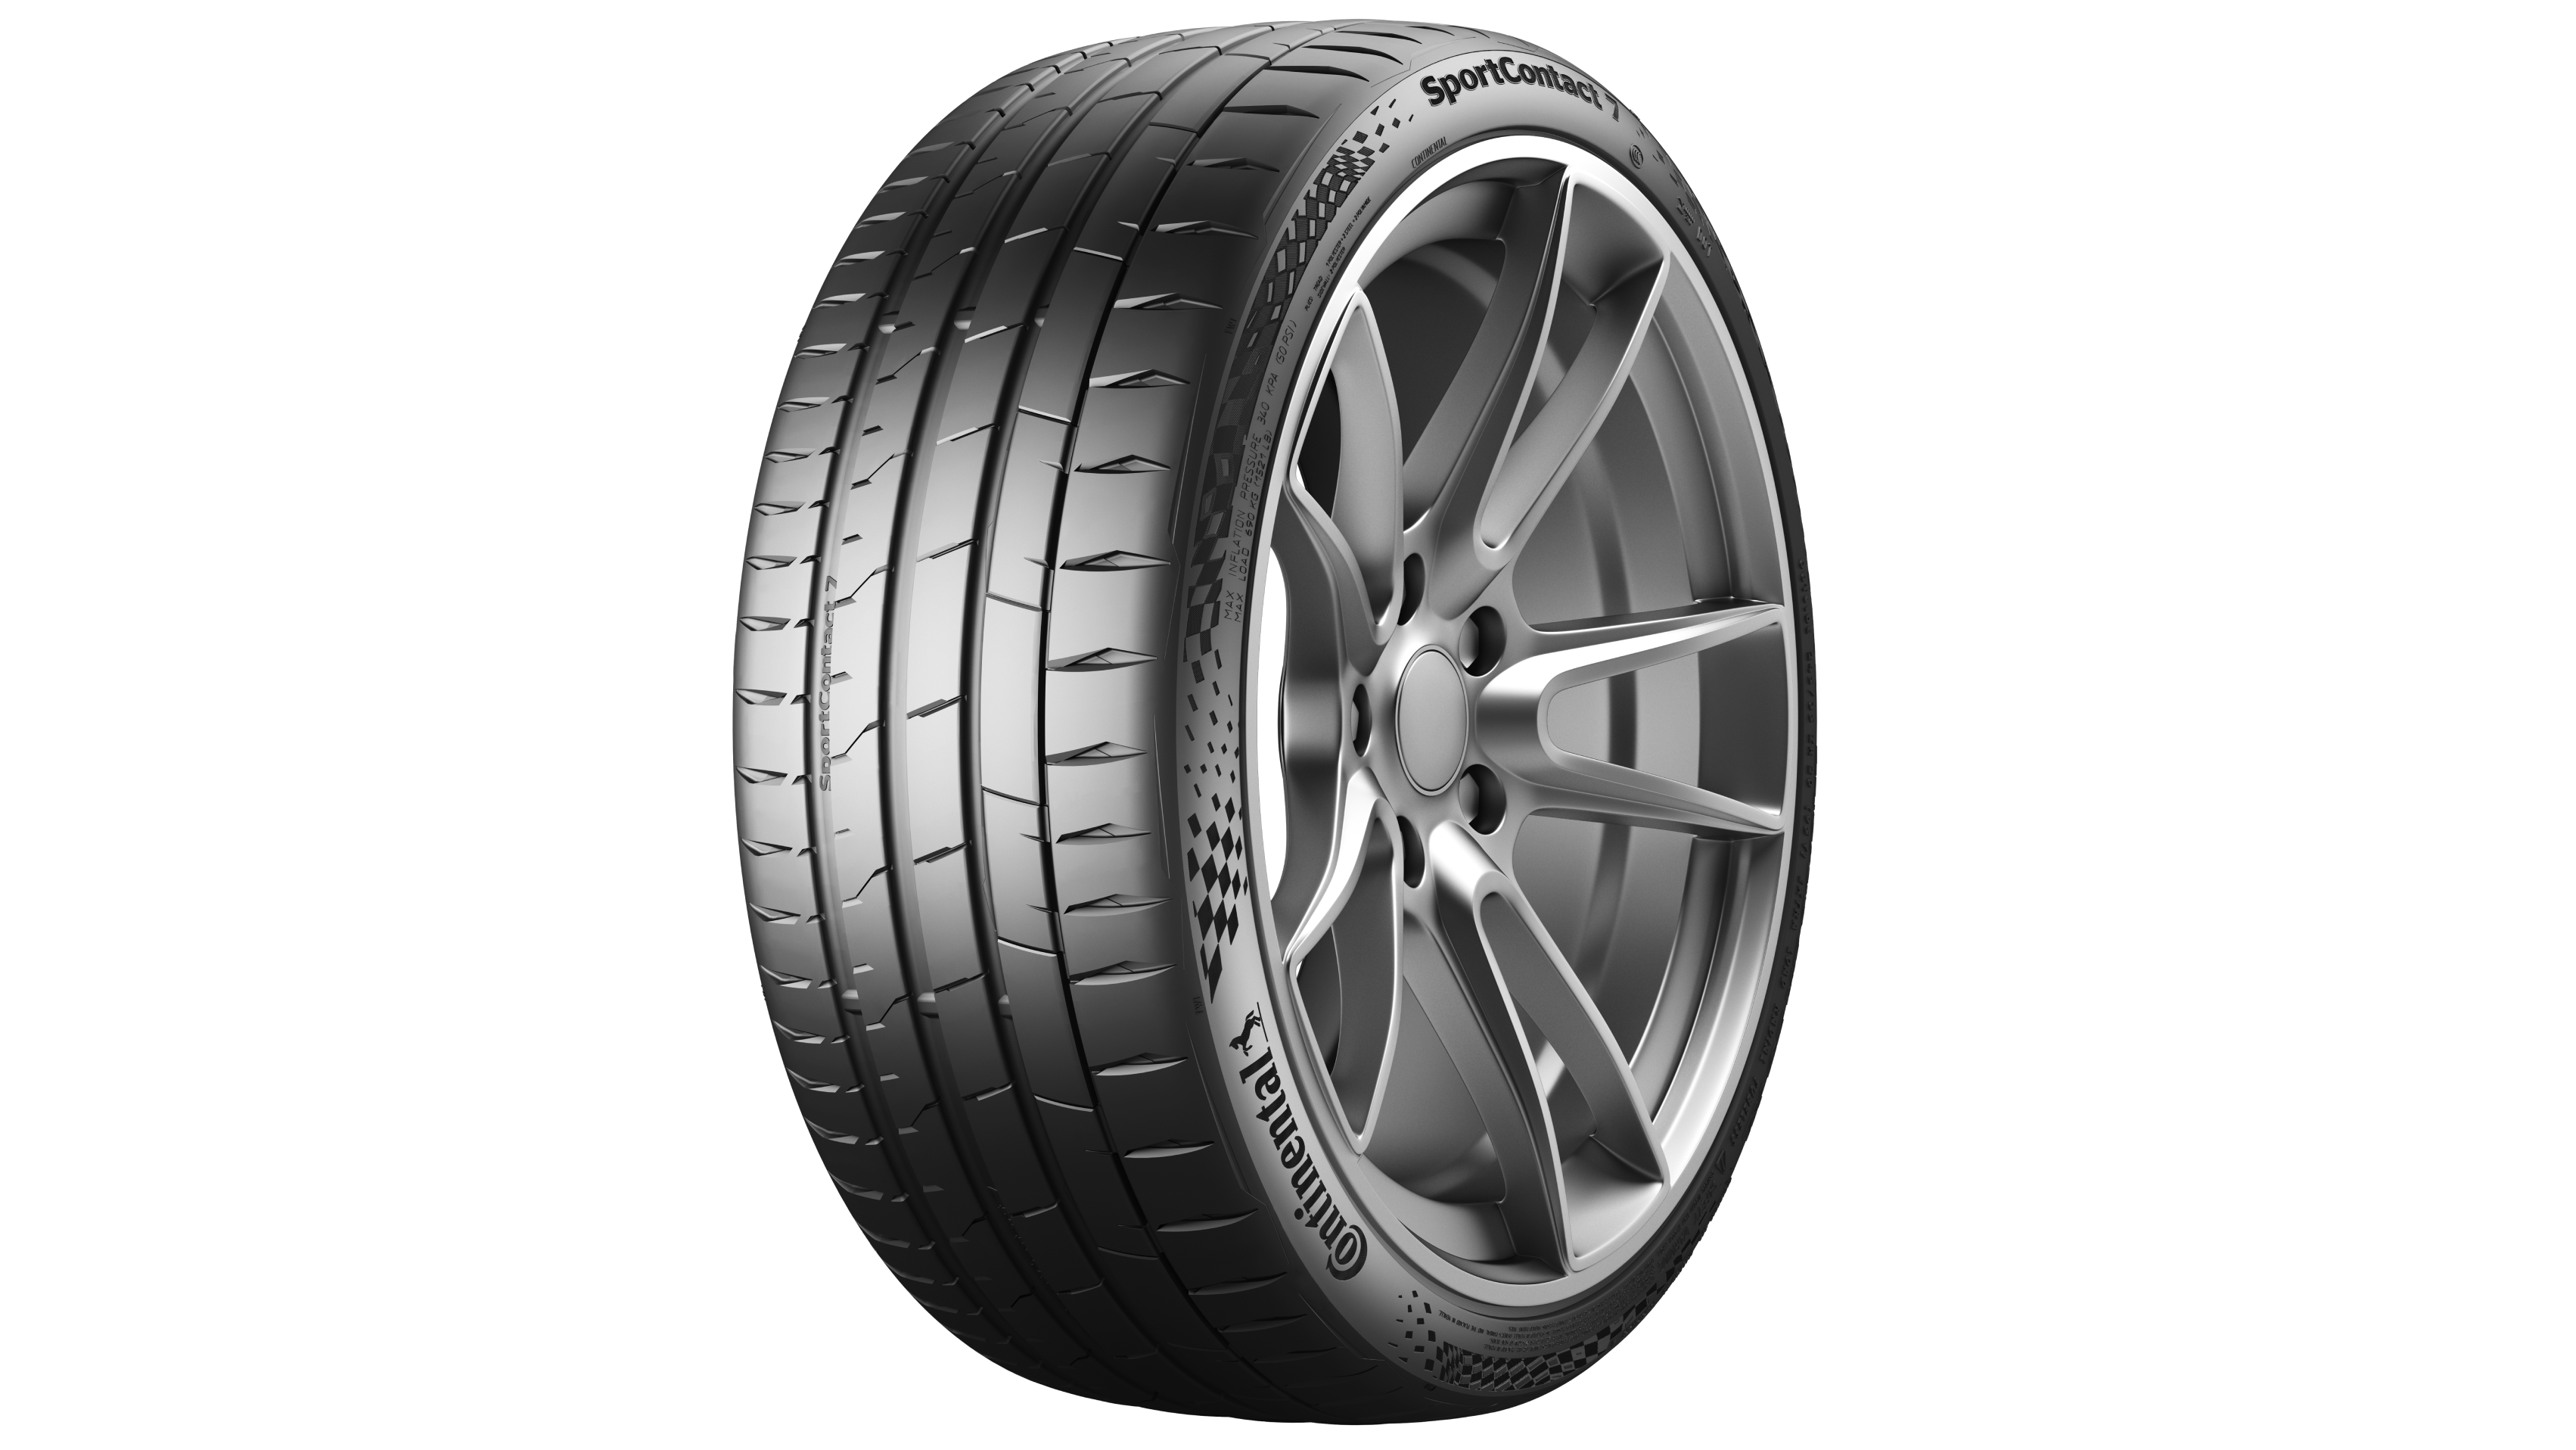 Factory - Continental Other Premium New SportContact Tires The come On and Series i5 5 From AG Continental BMW 7 and